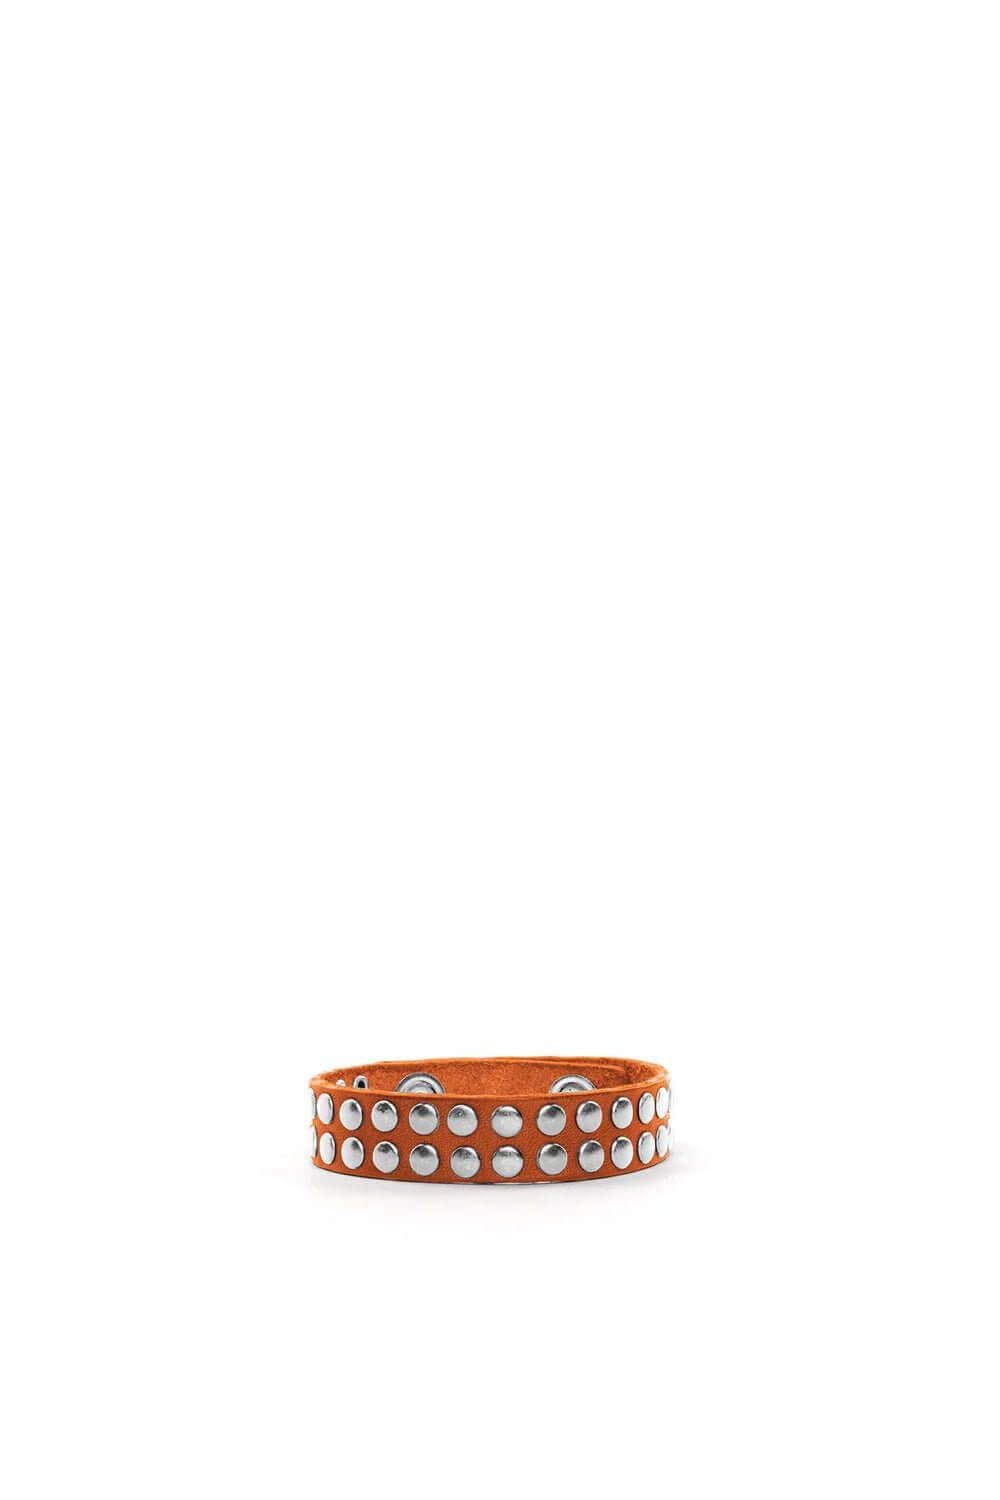 10.000 MINI BR Leather bracelet with studs, zamac button closure with carved HTC Los Angeles logo. HTC LOS ANGELES